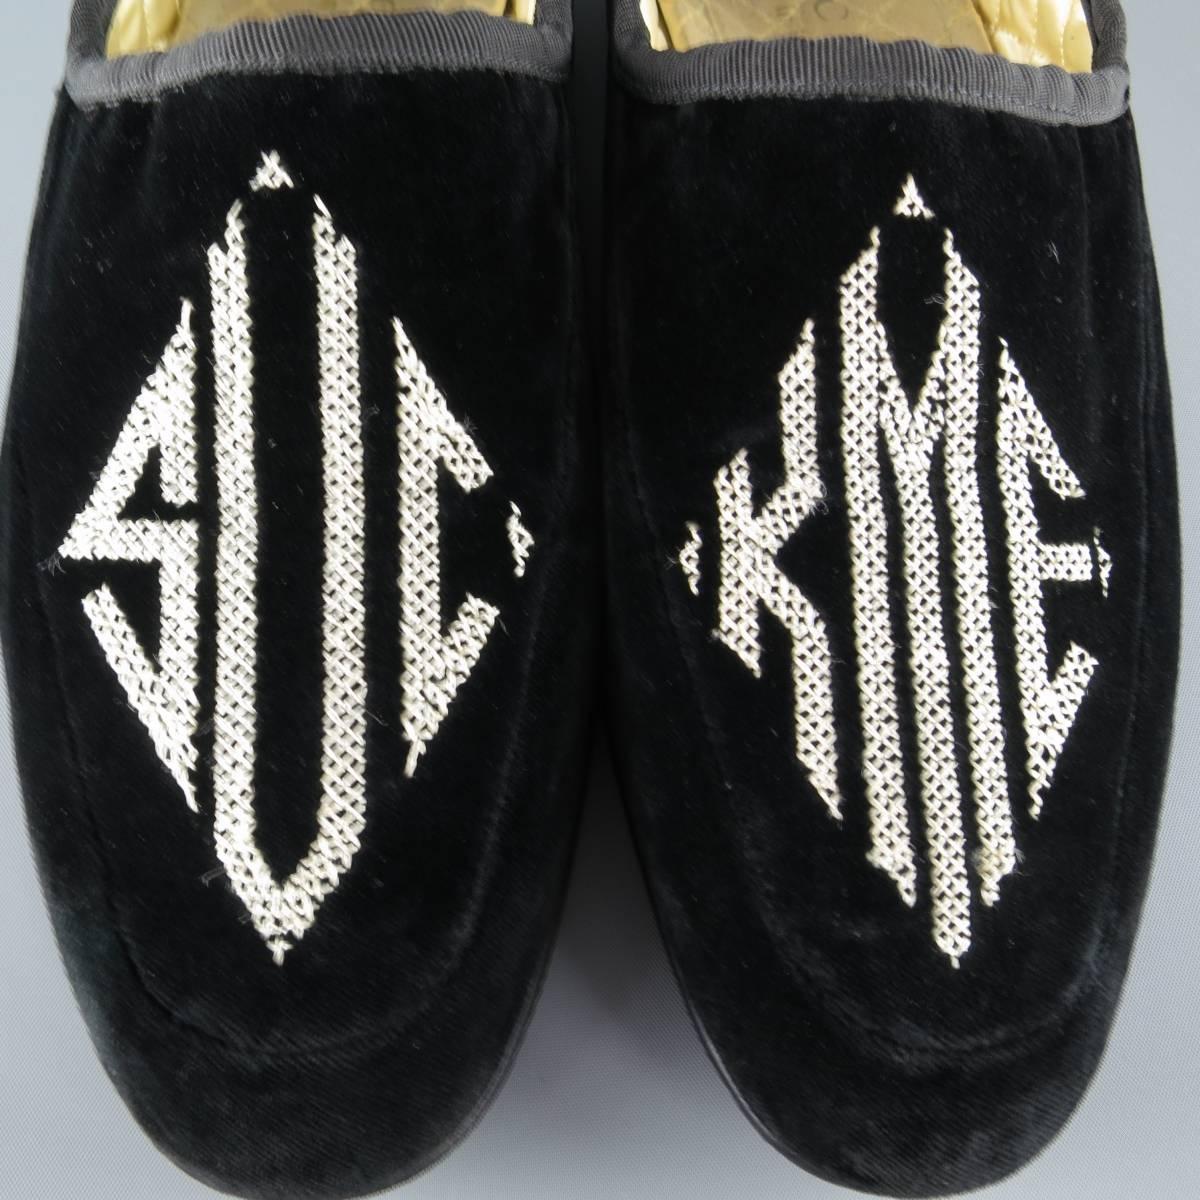 These extremely rare TOM FORD for GUCCI loafers come in black velvet with faille piping featuring embroidered 